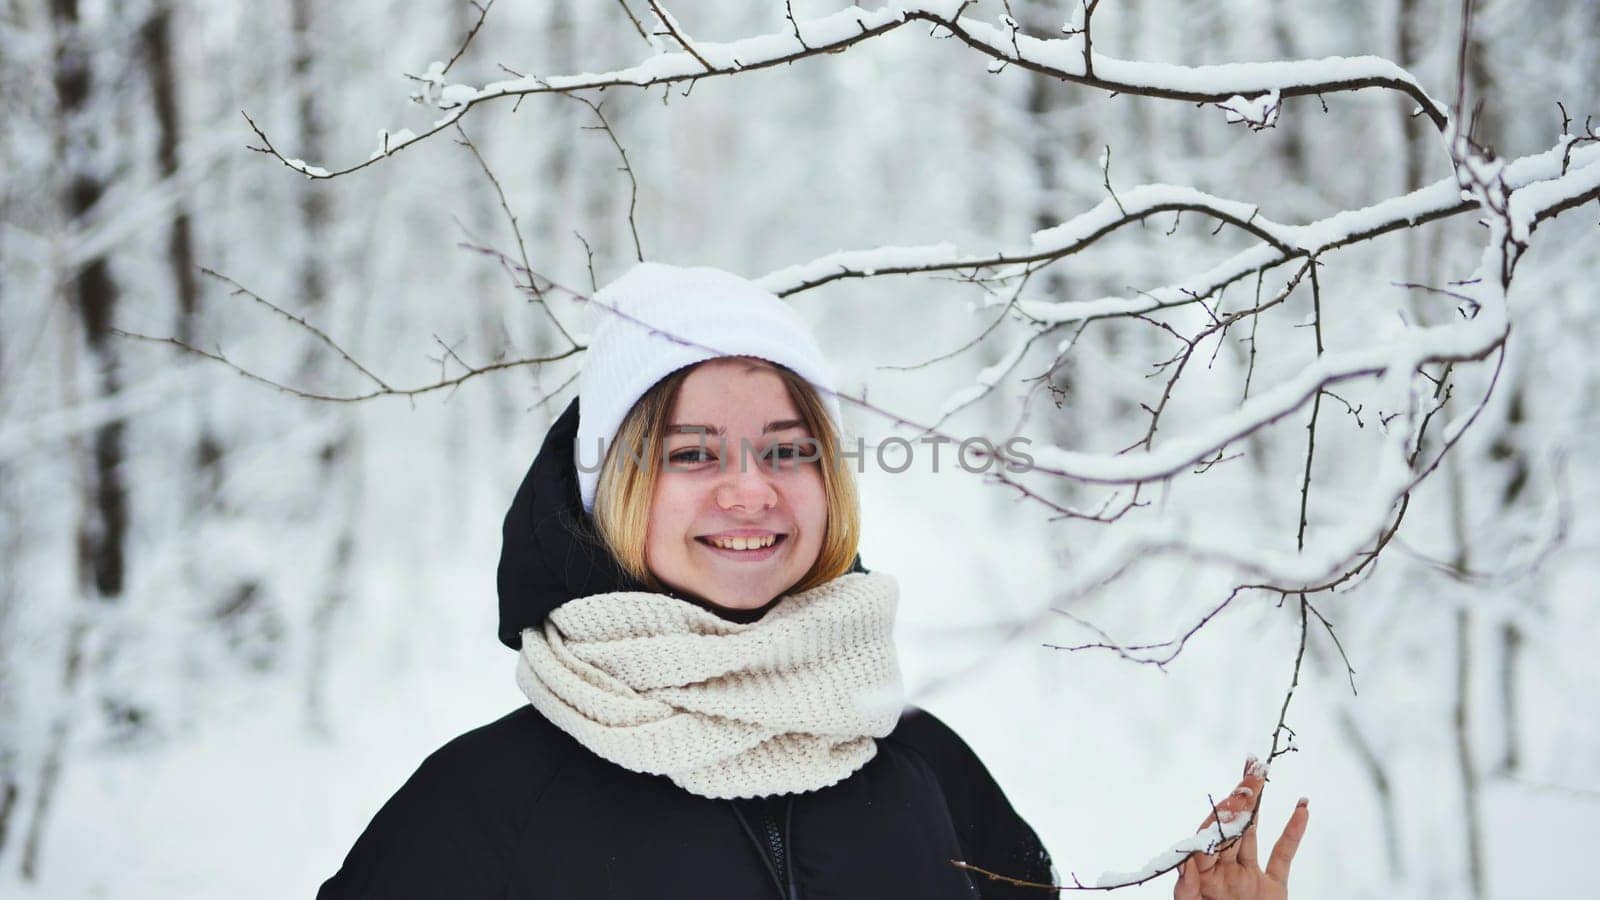 A girl gently touches snowy tree branches in the forest. by DovidPro